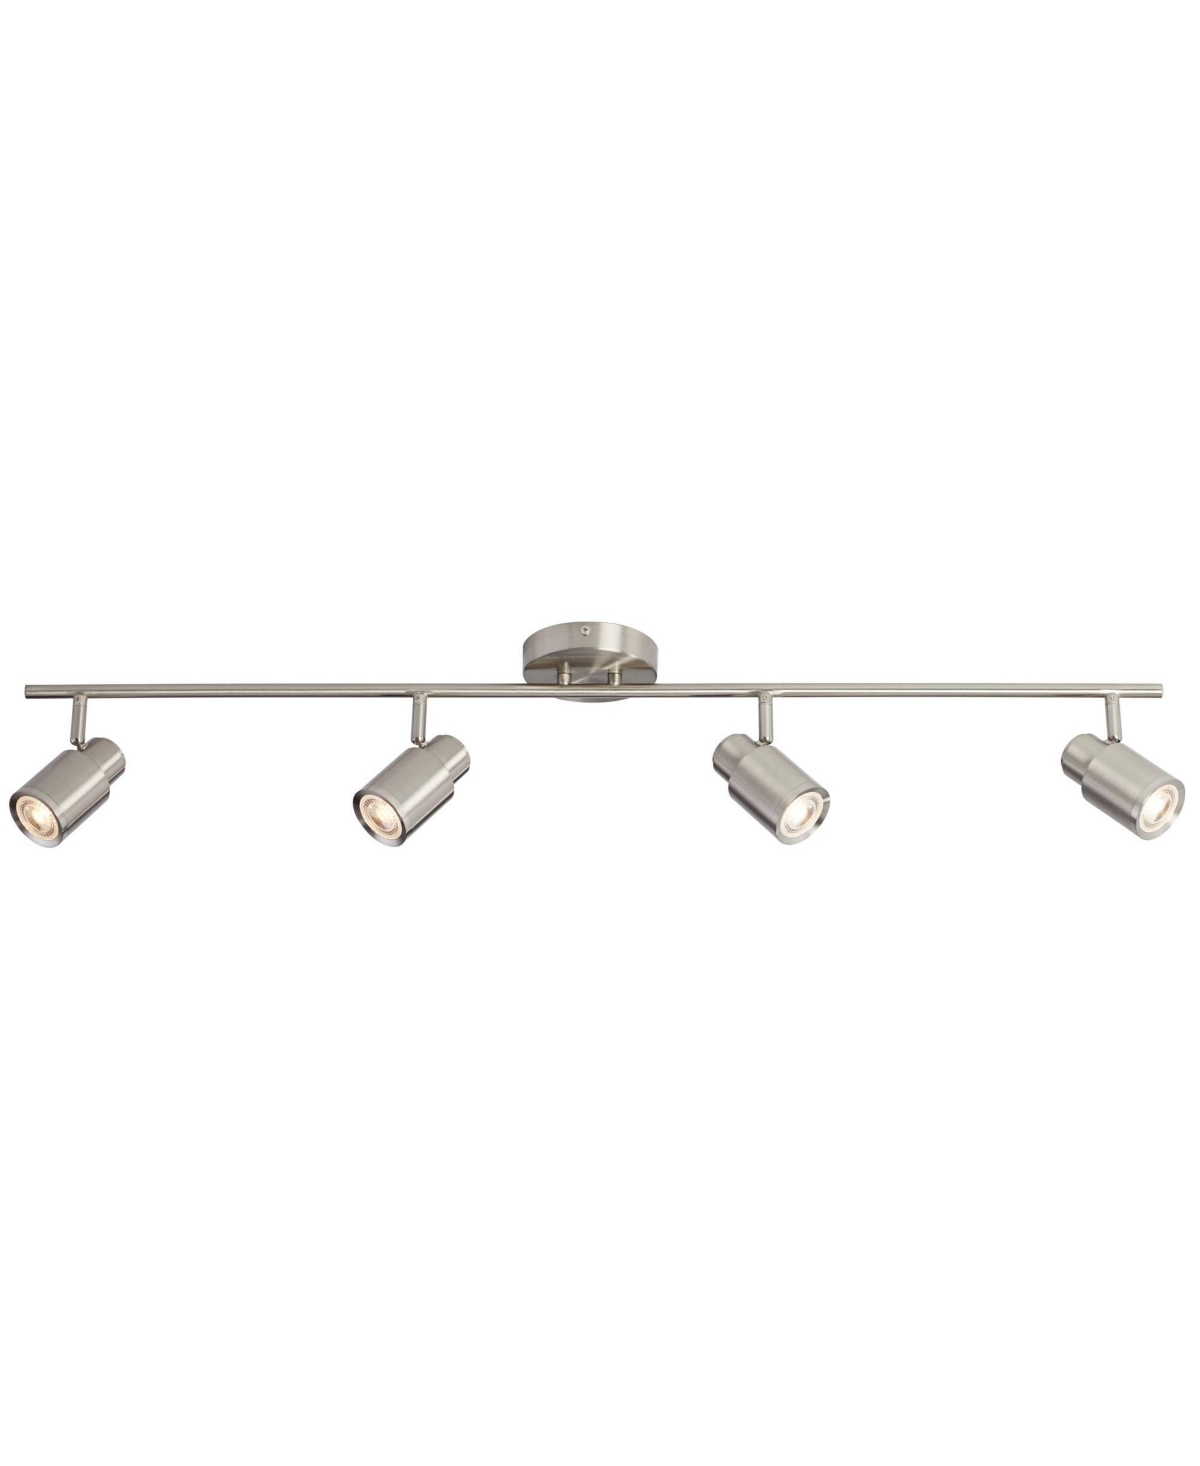 Pro Track Protrack Melson 8.5 Watt Gu10 Brushed Nickel Led Wall Or Ceiling Track Kit -  In Silver